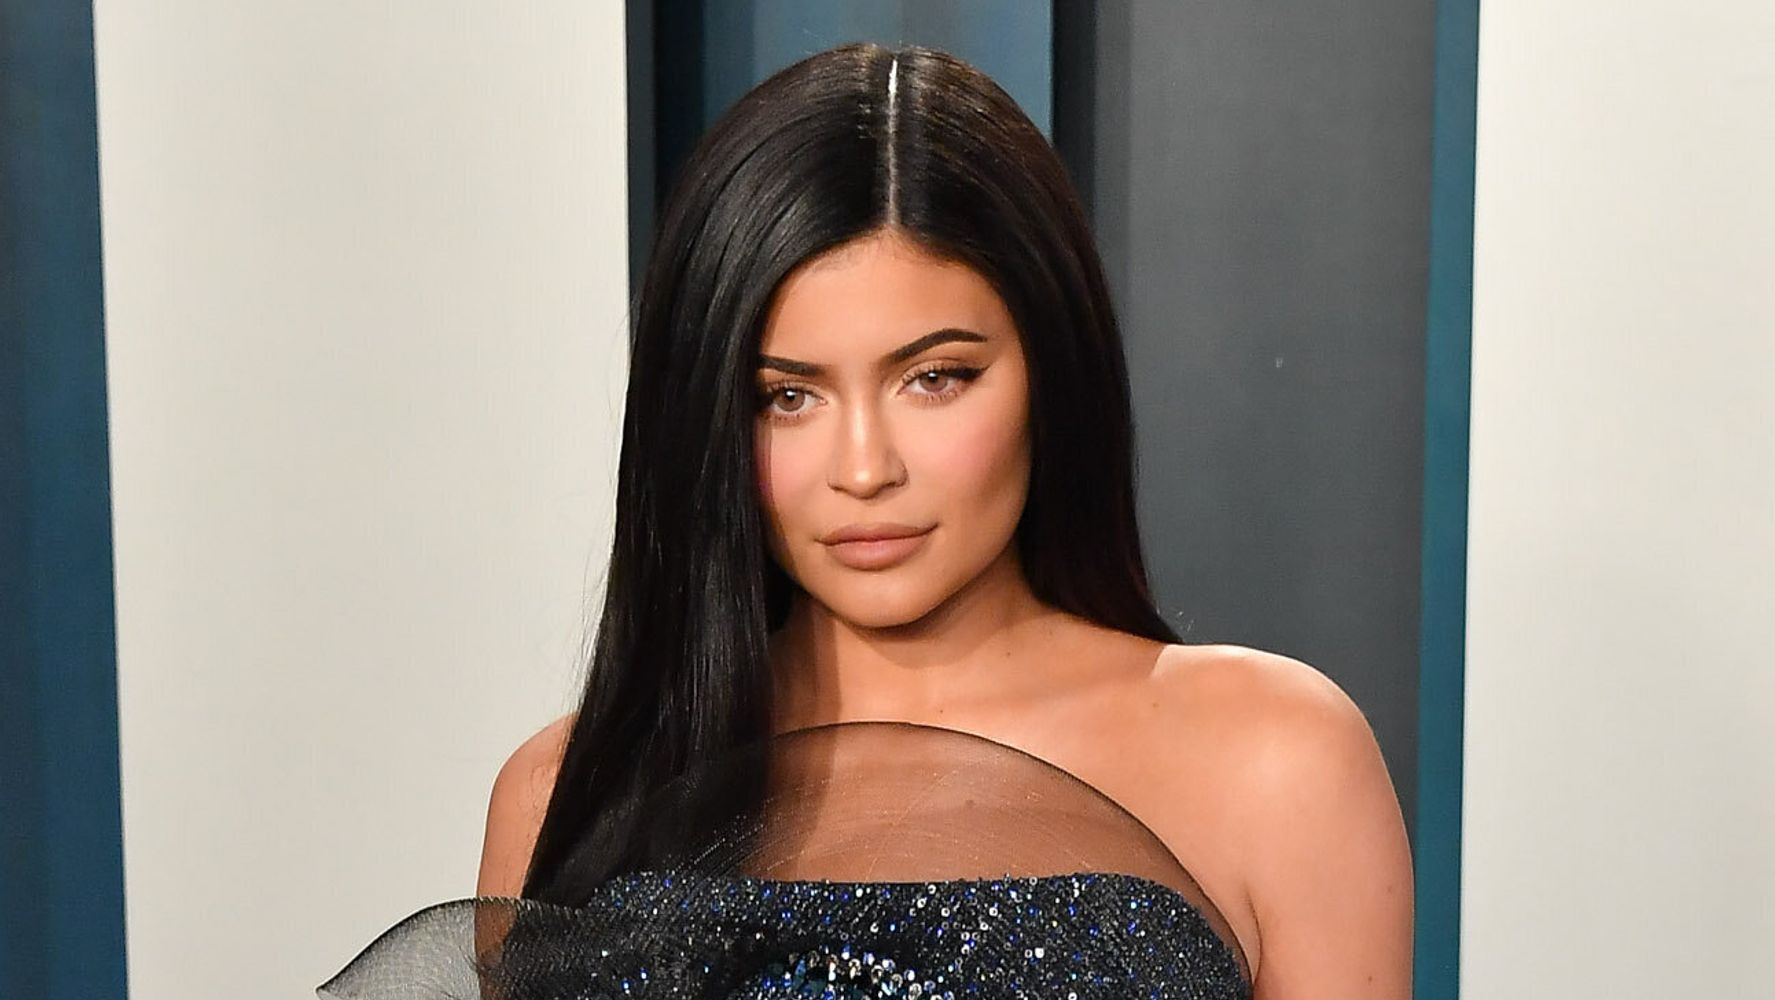 Kylie Jenner was criticized for asking for donations to pay for stylist surgery